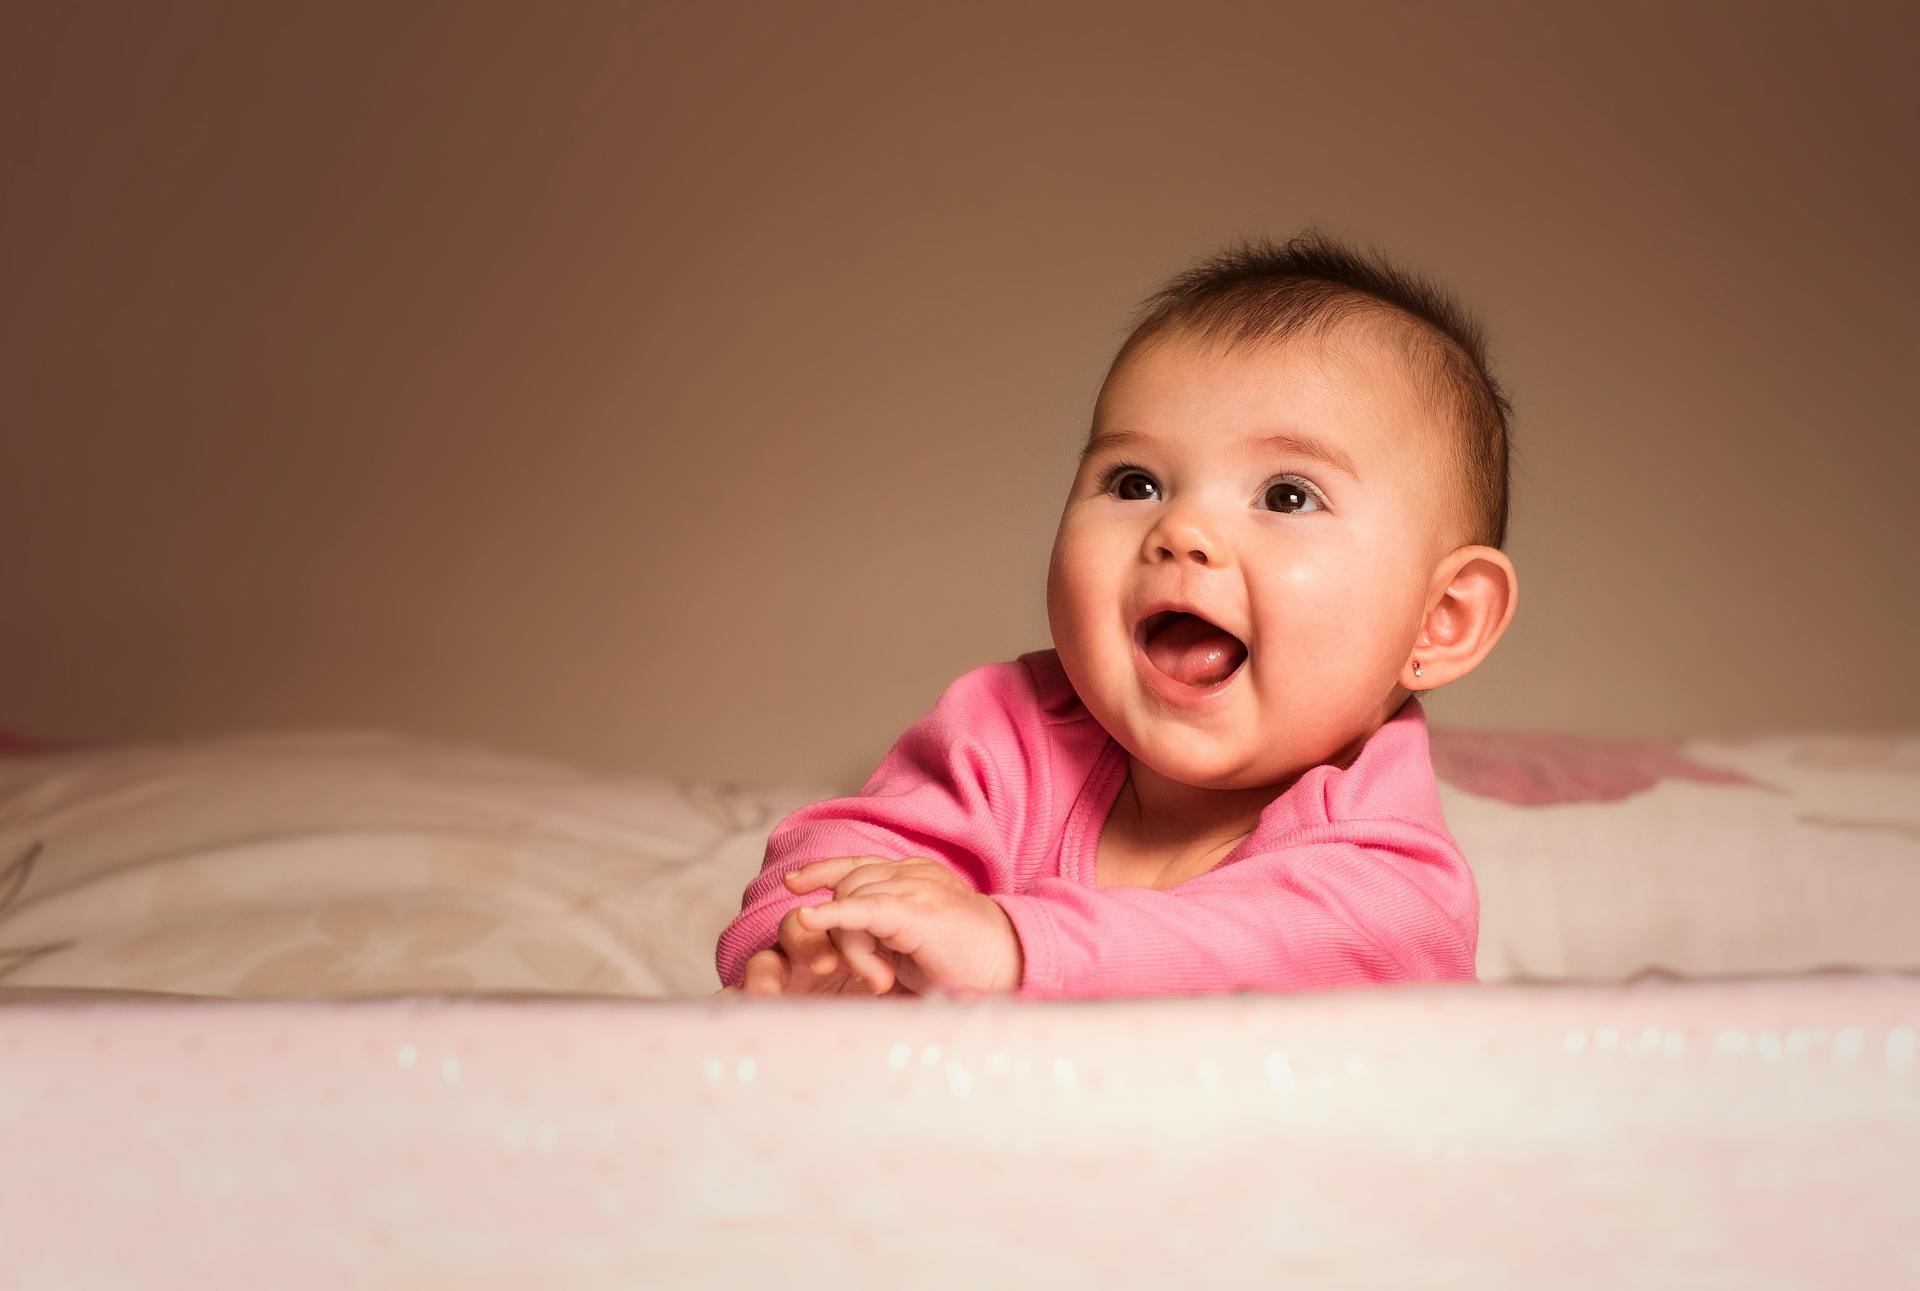 A smiling baby girl | Source: Pexels